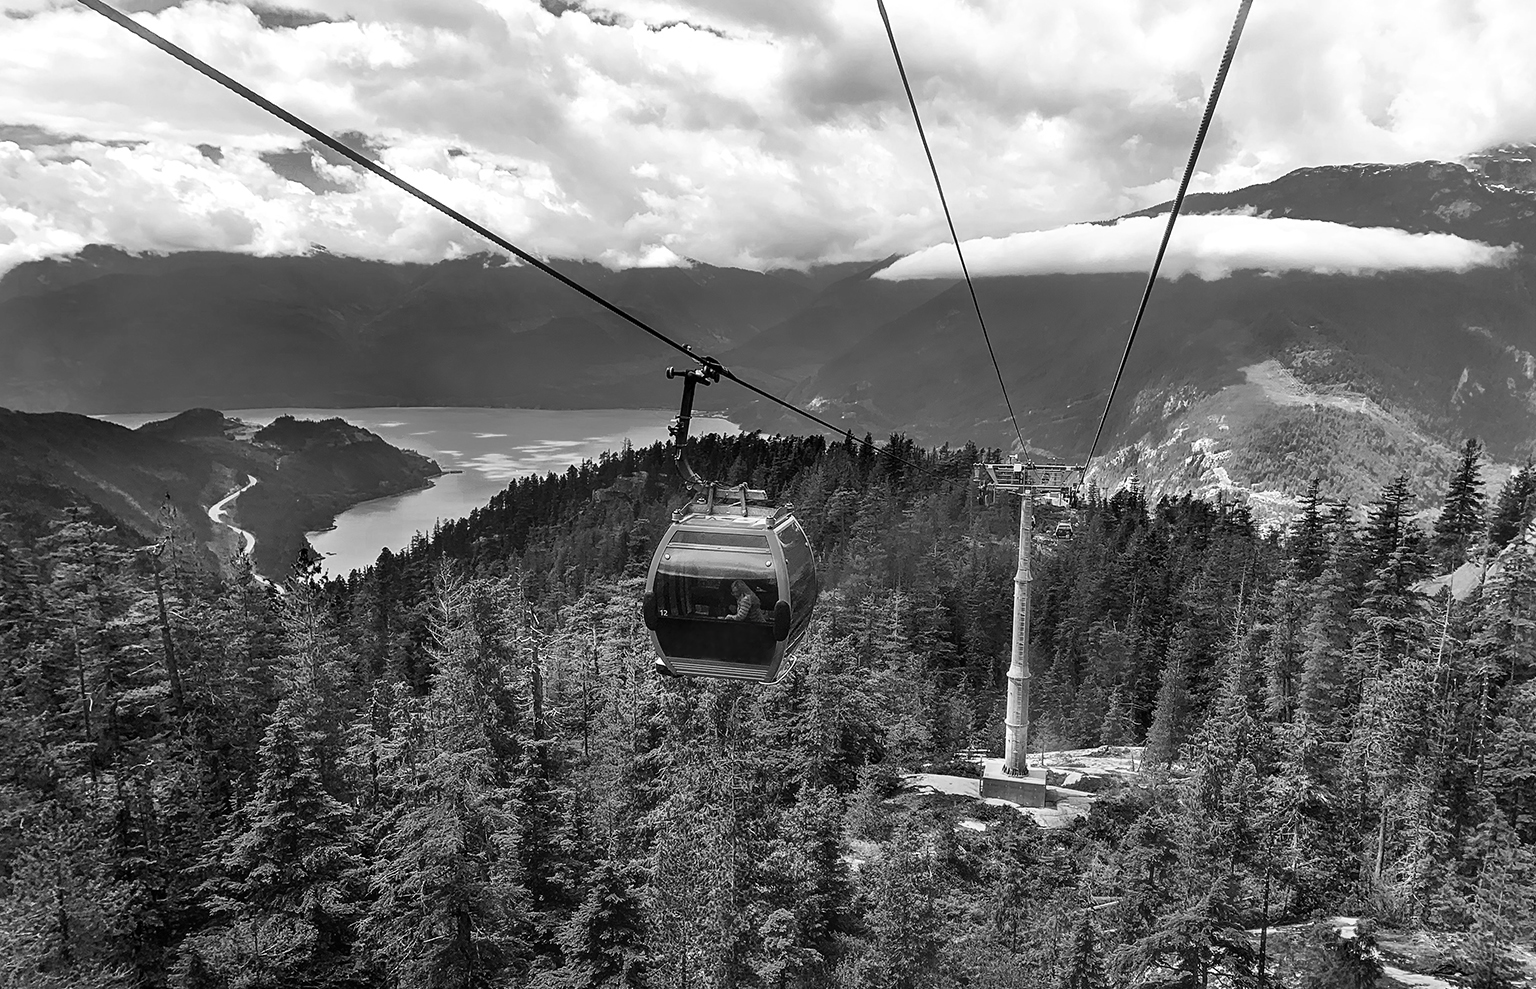 sea to sky gondola cars and guy wires and view